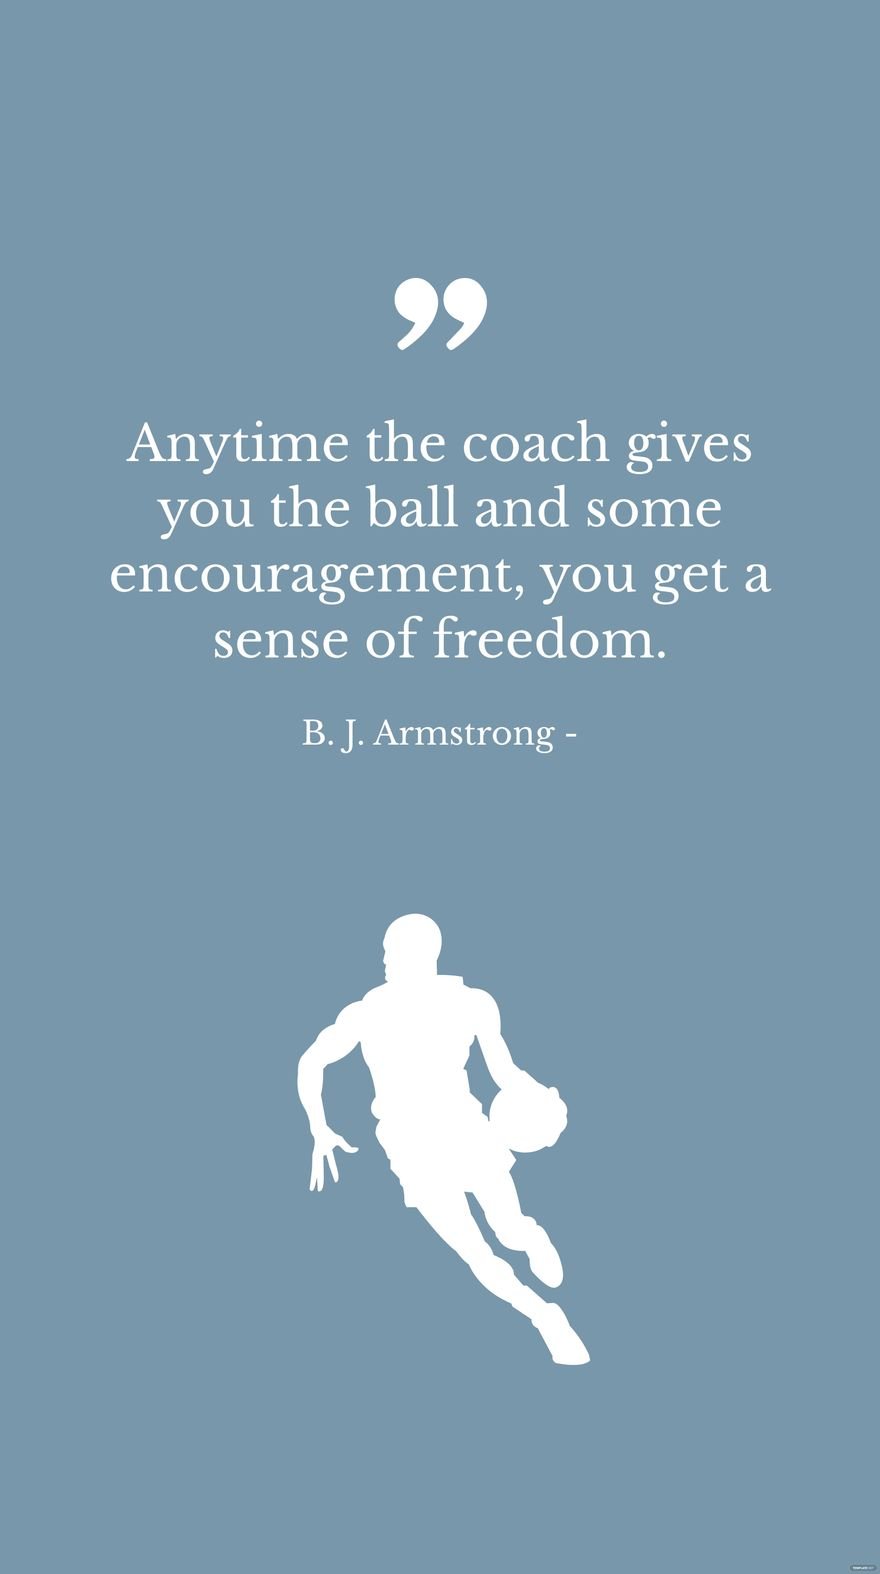 B. J. Armstrong - Anytime the coach gives you the ball and some encouragement, you get a sense of freedom.